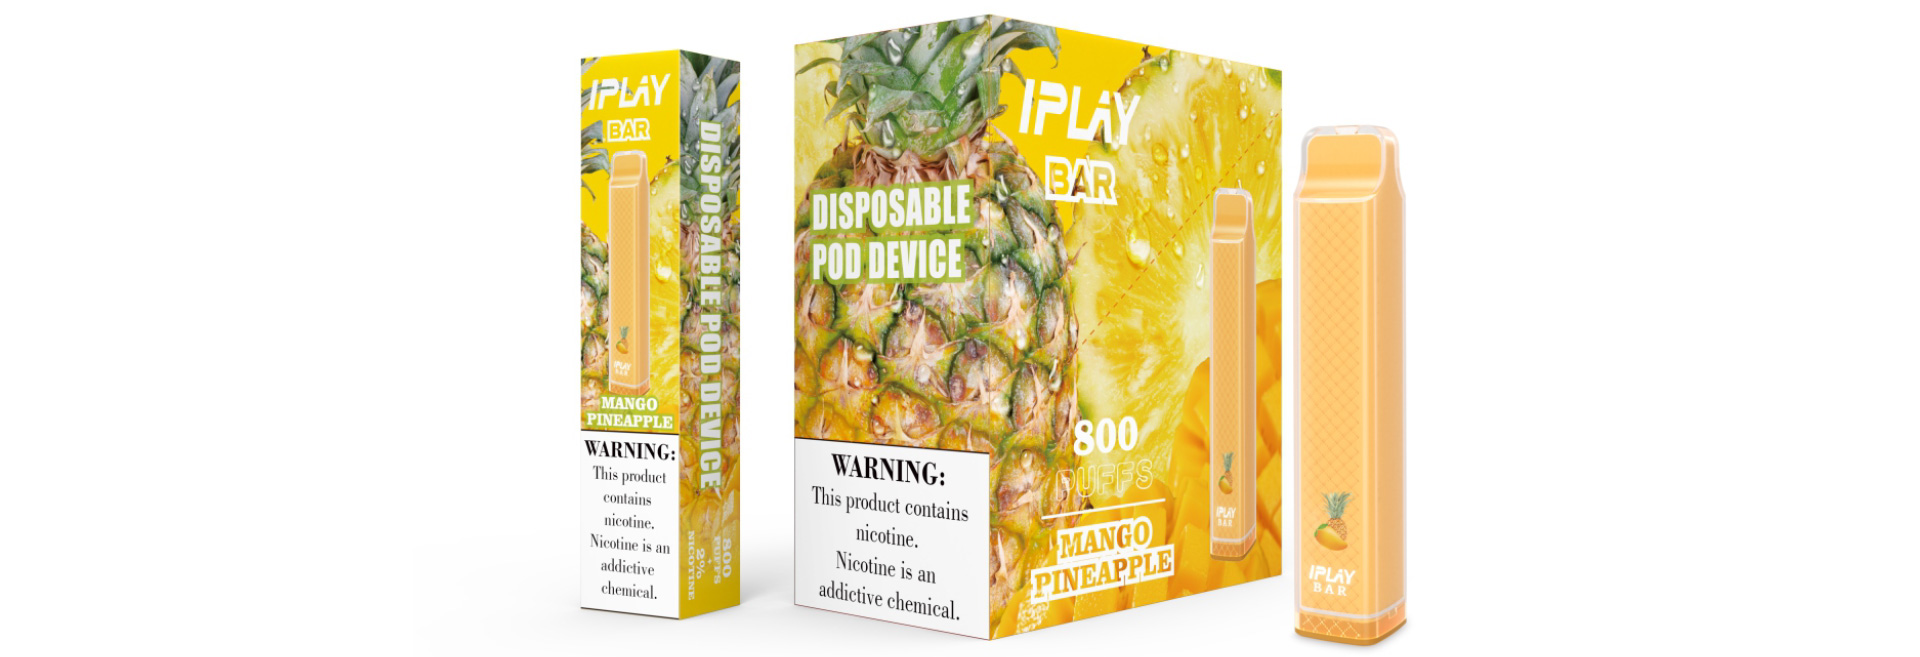 IPLAY BAR DISPOSABLE POD - Package